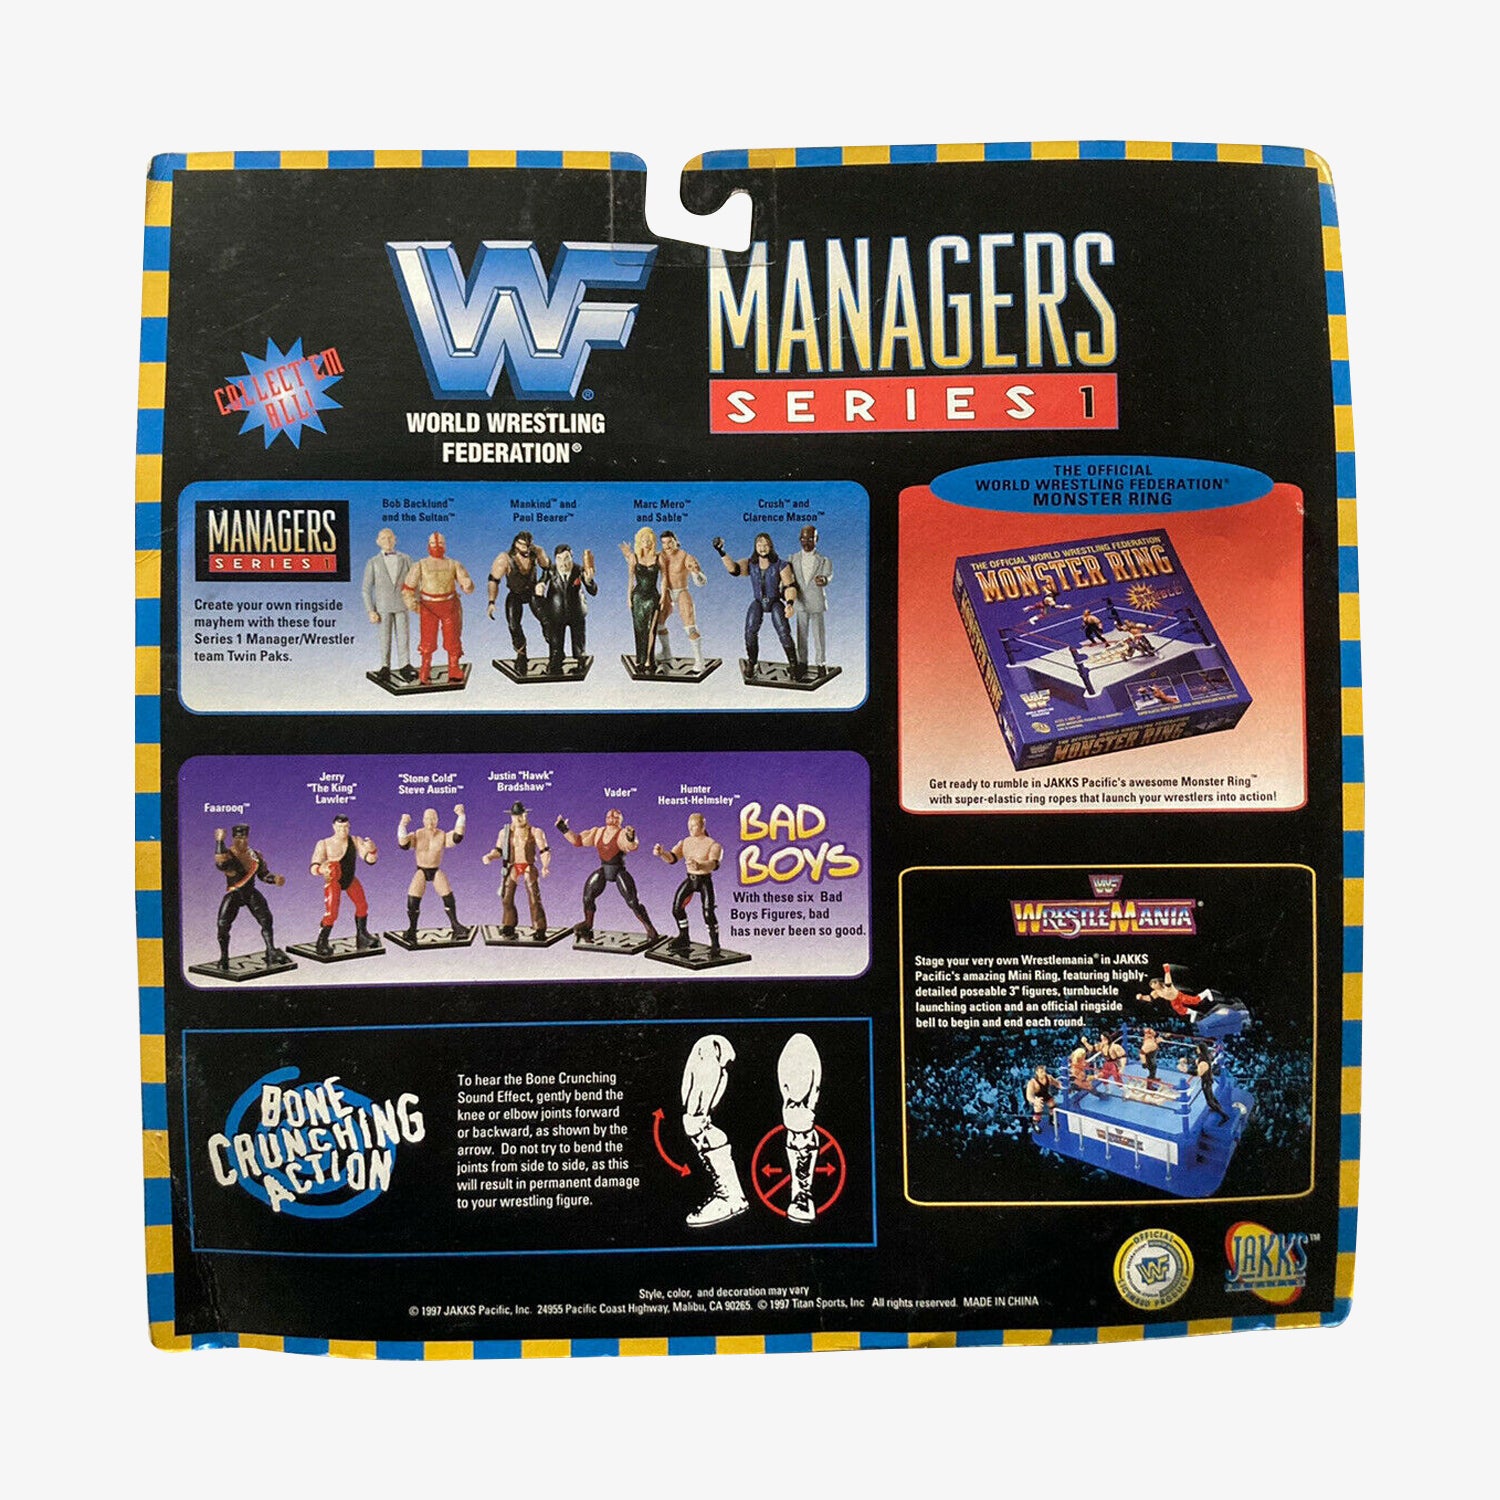 WWF Jakks Pacific Managers Series 1 Clarence Mason and Crush figures available at slamazon.ca